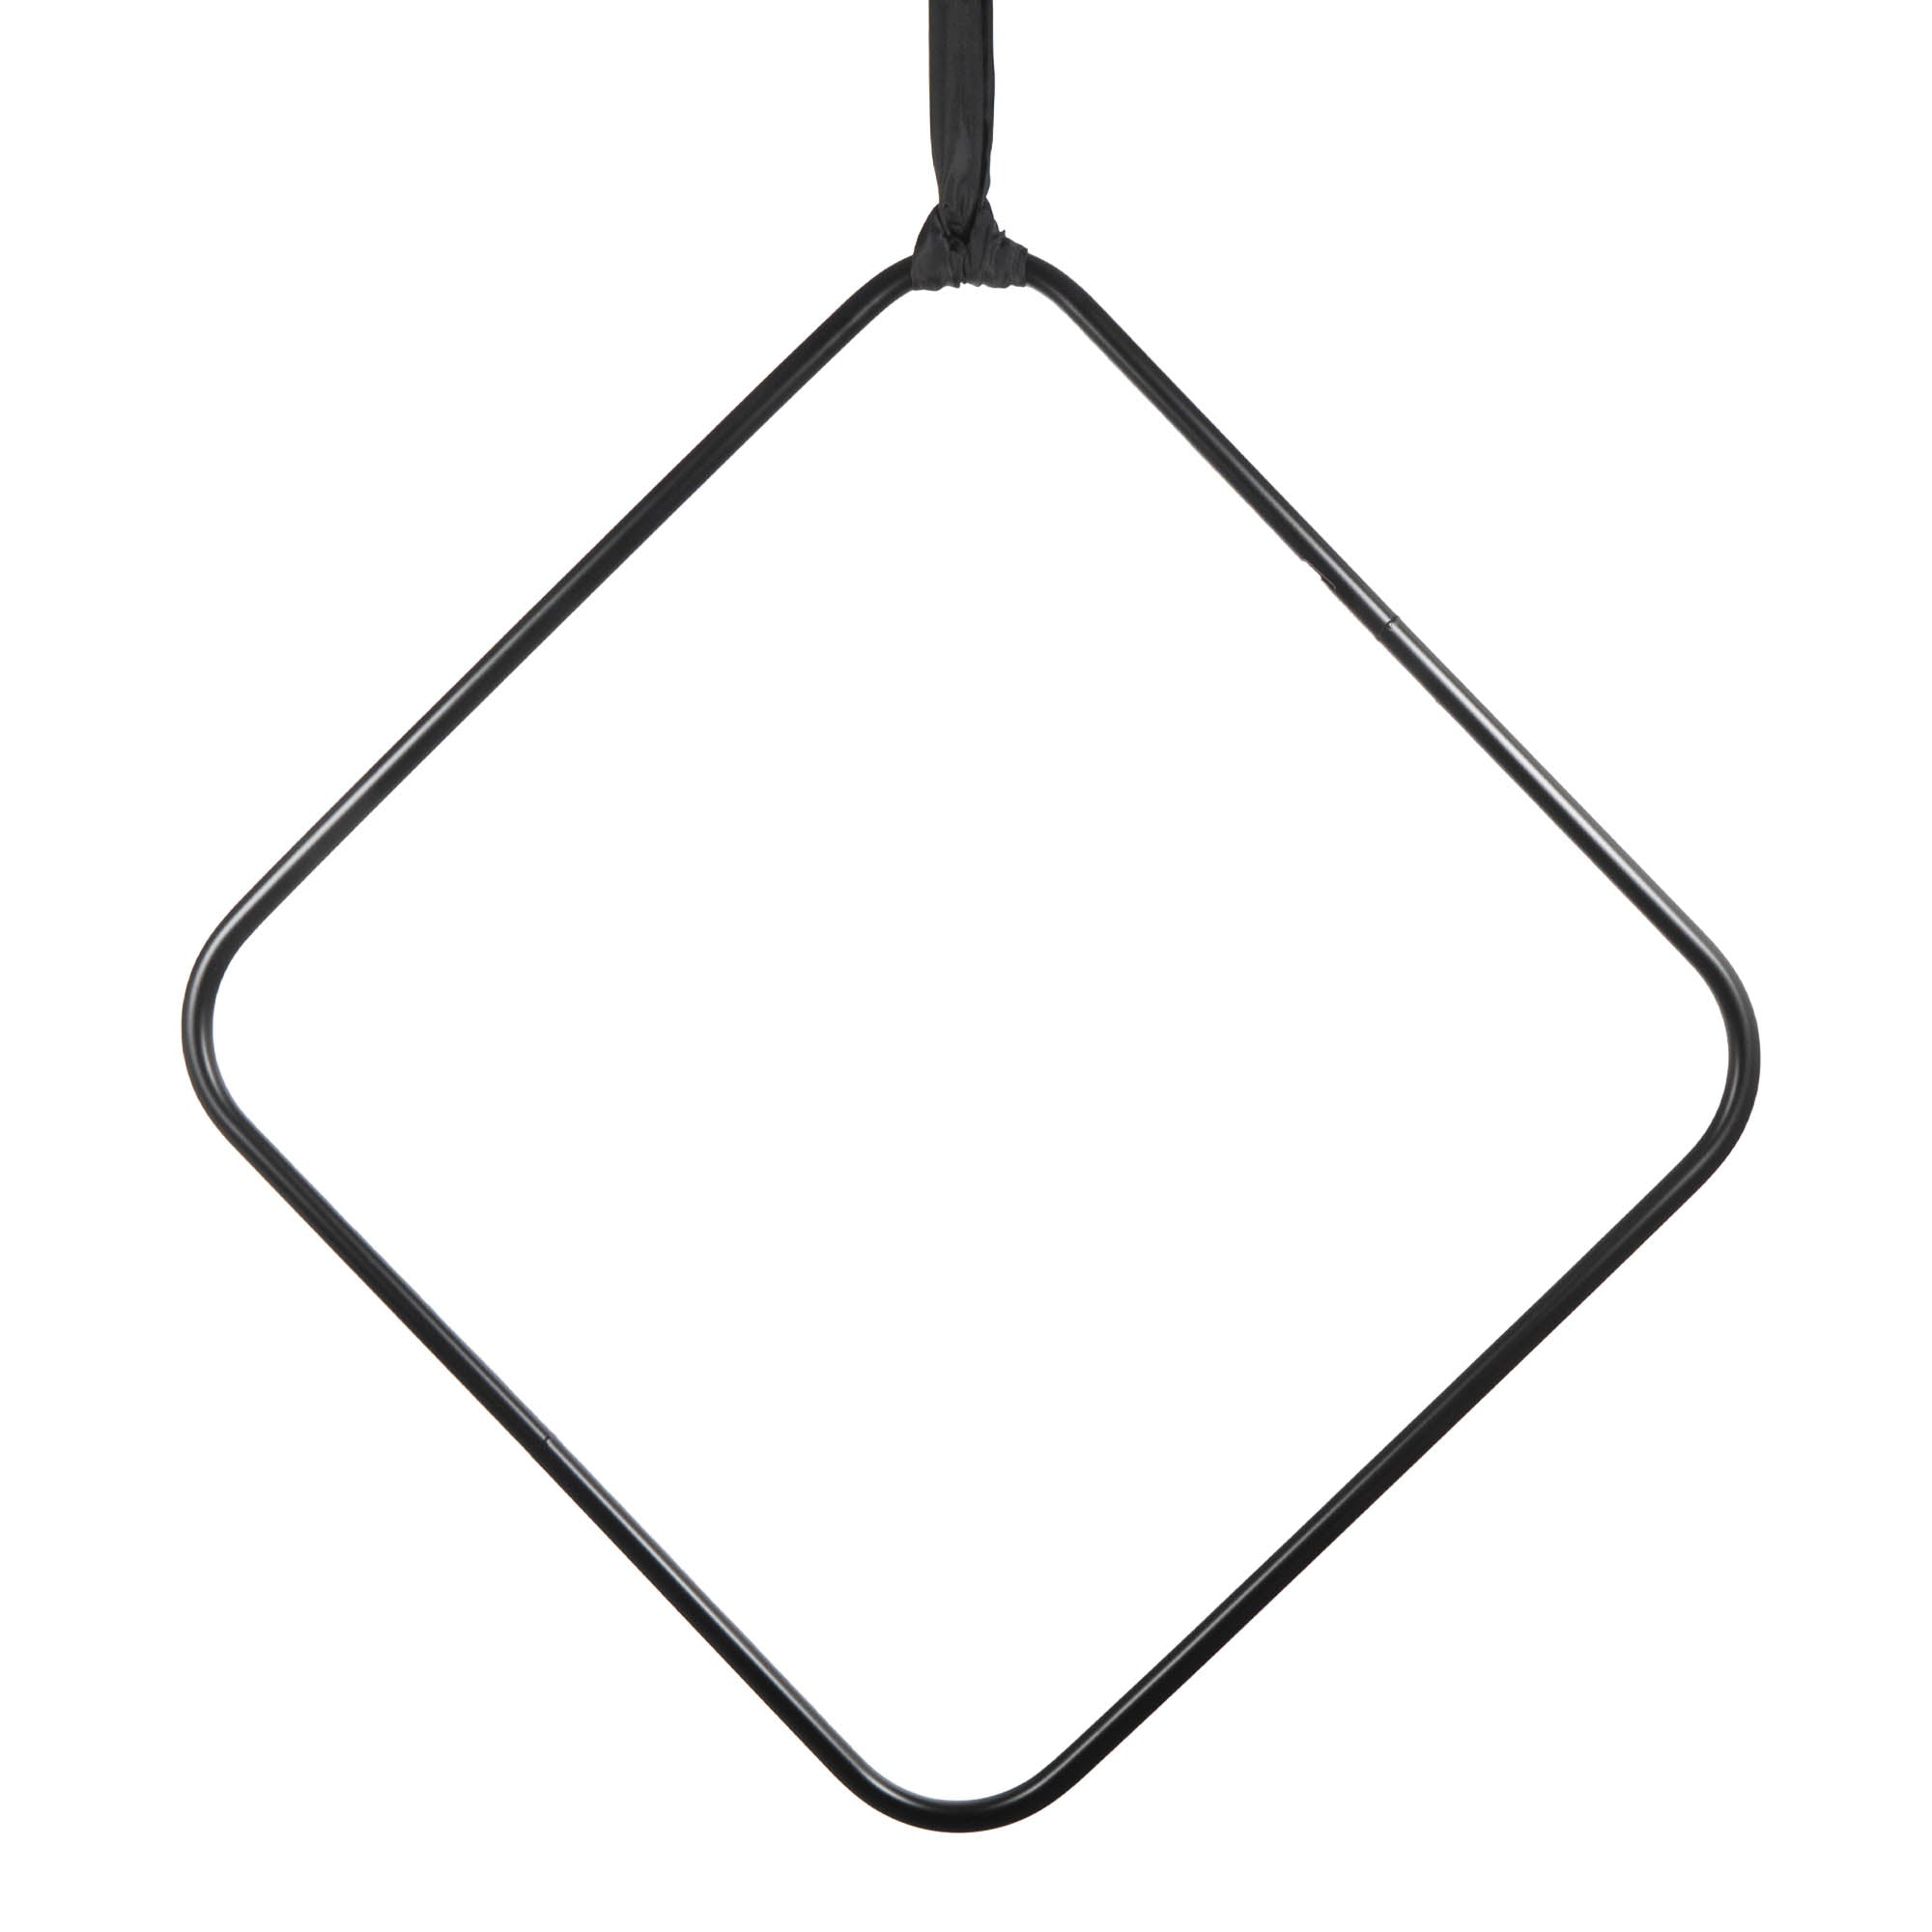 an aerial square rigged in diamond shape